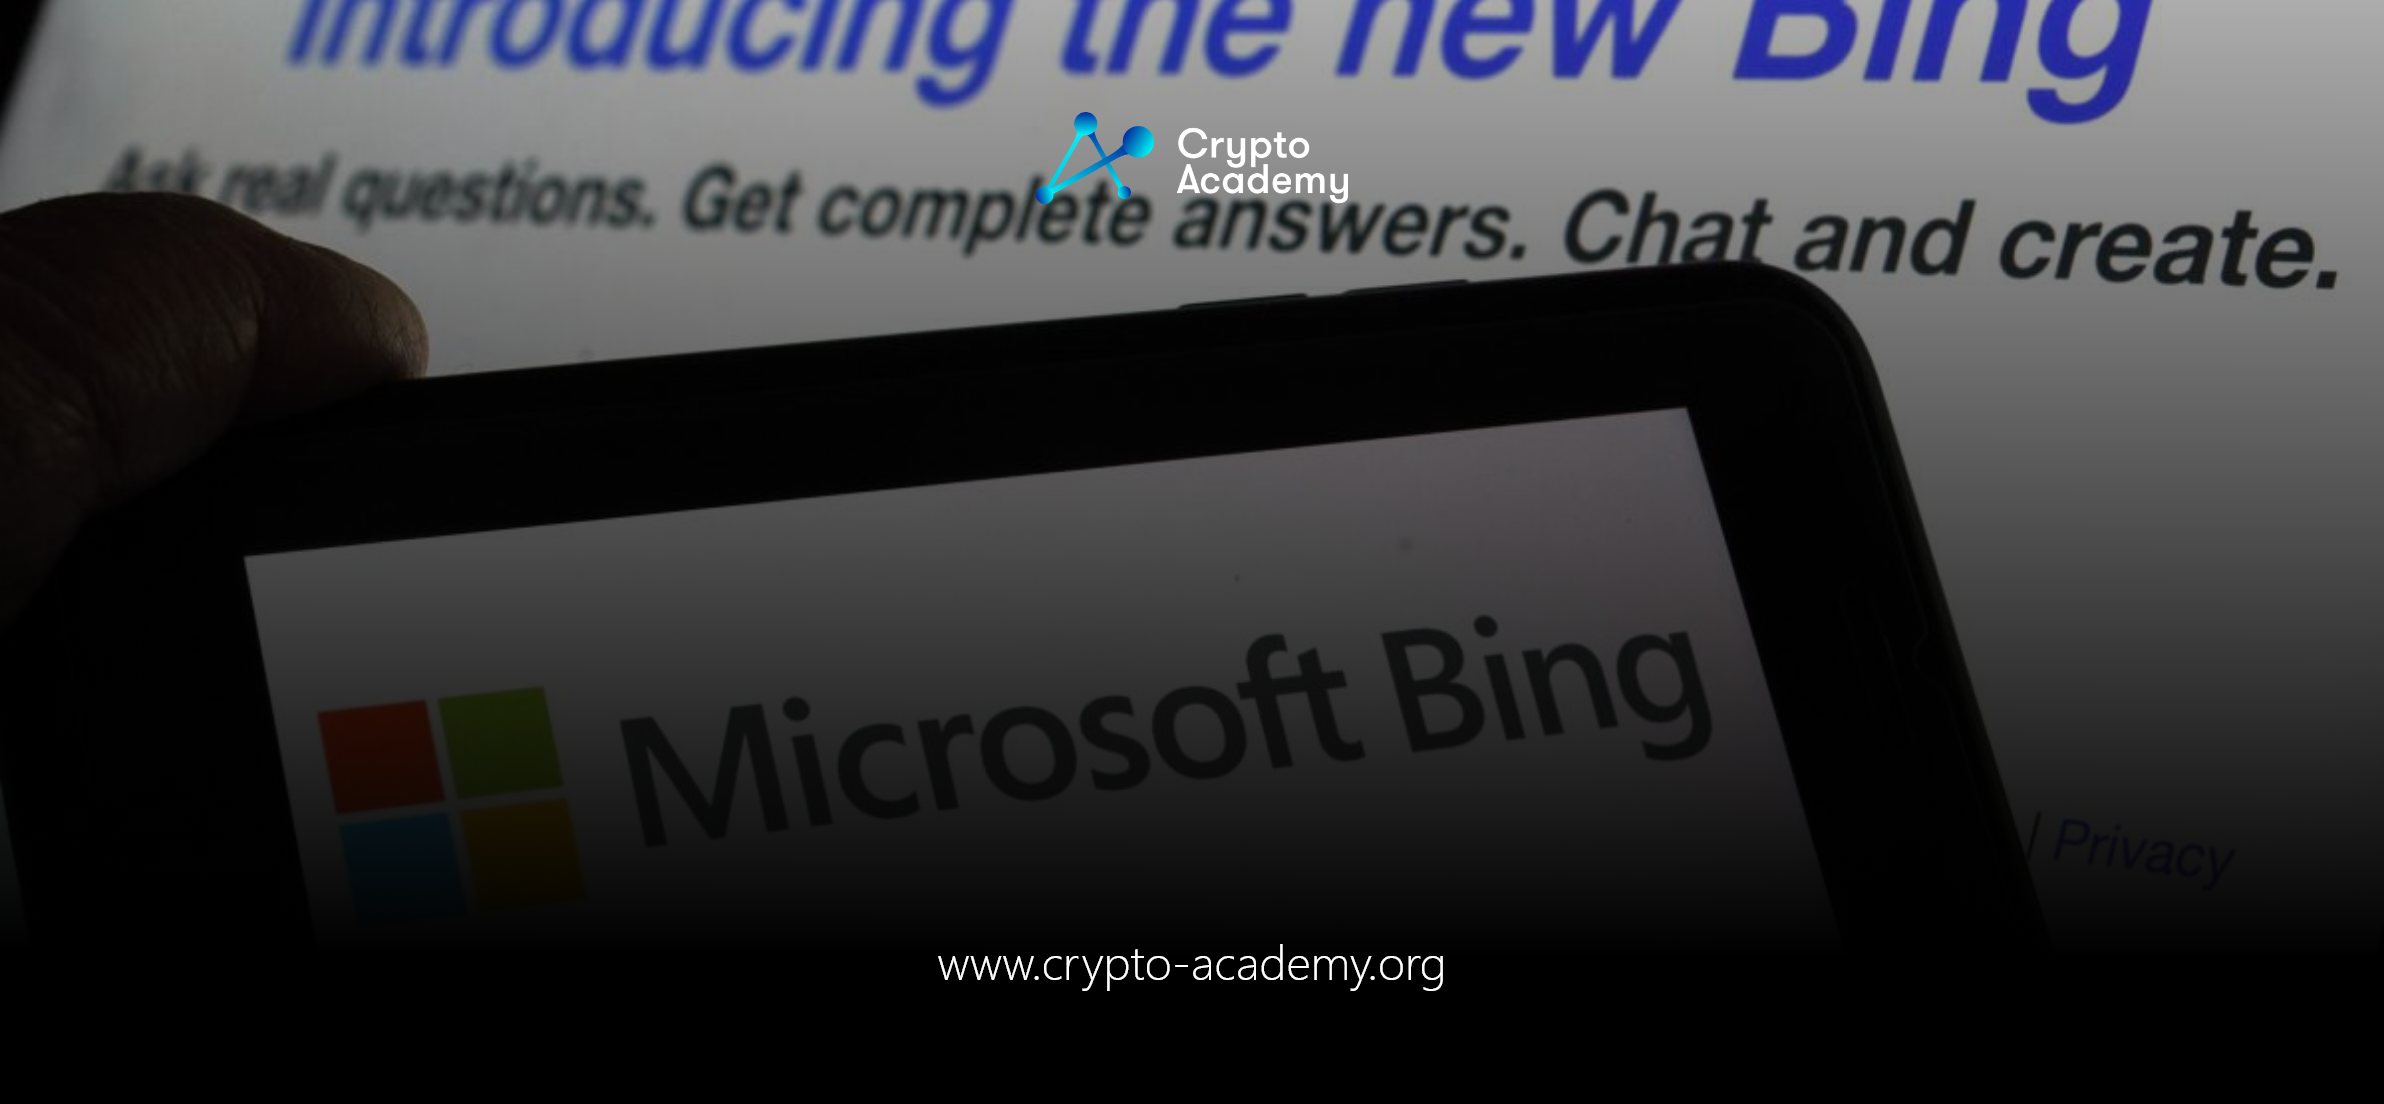 Microsoft Bing AI Chatbot Shares Inaccurate Election Data